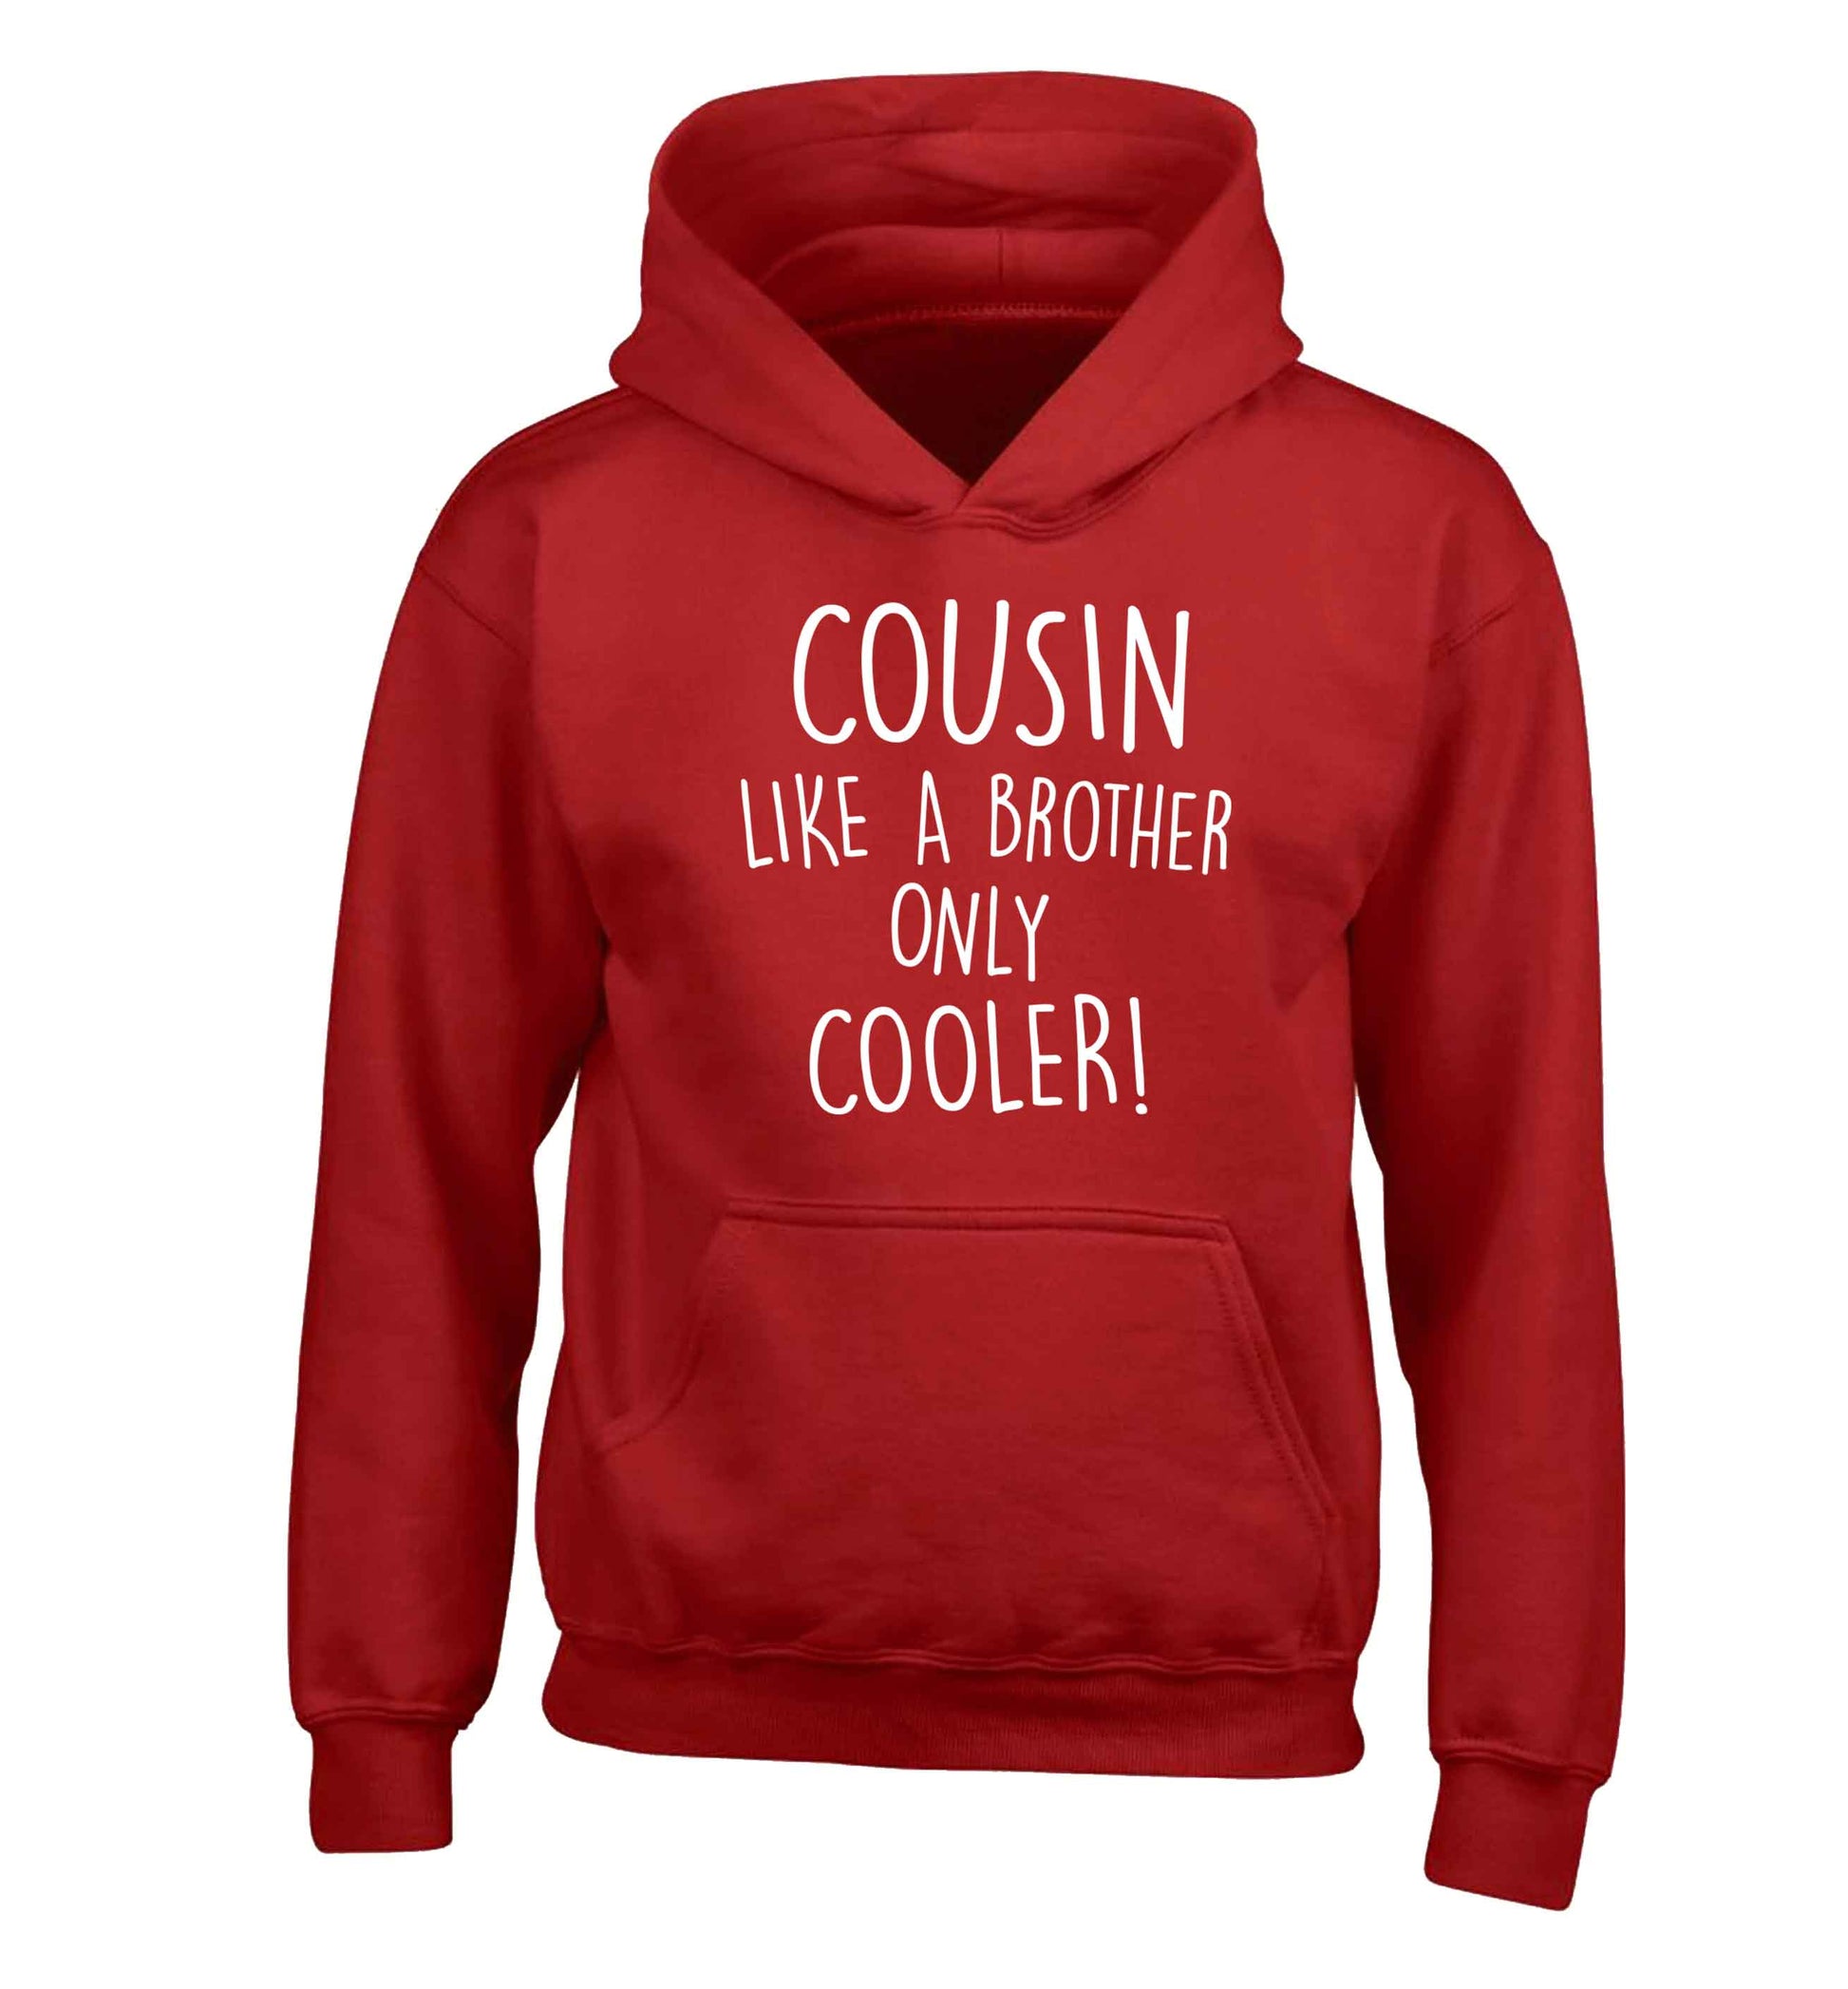 Cousin like a brother only cooler children's red hoodie 12-13 Years